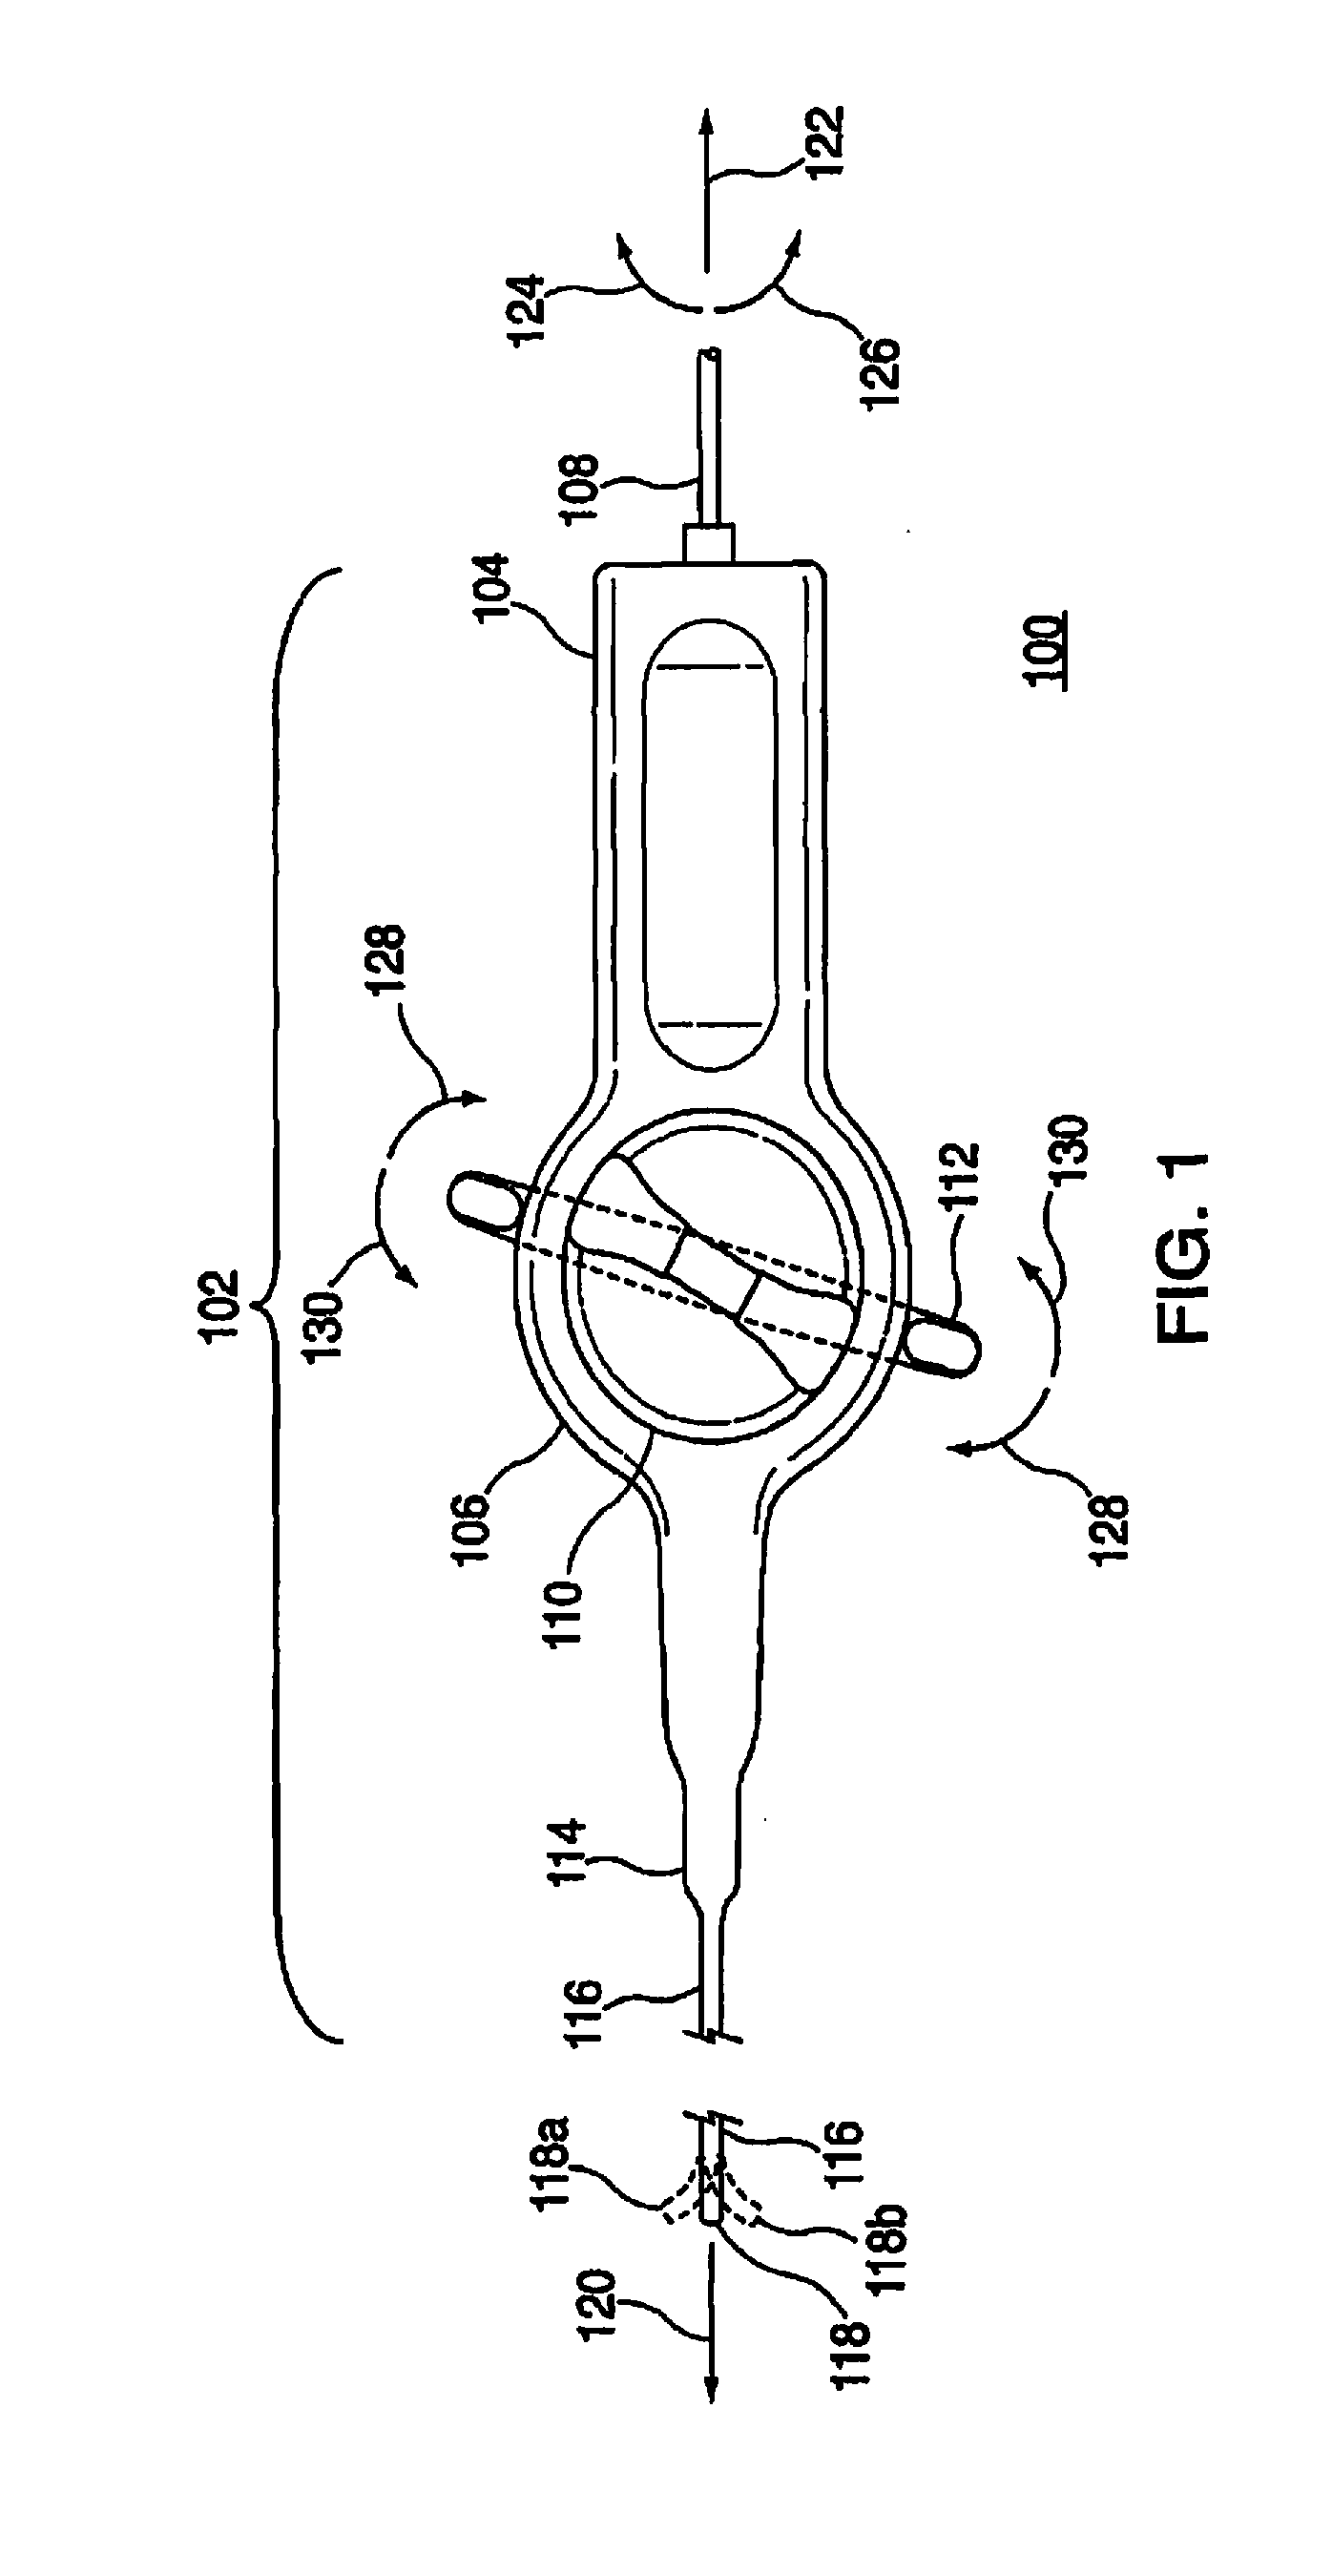 Remotely controlled catheter insertion system